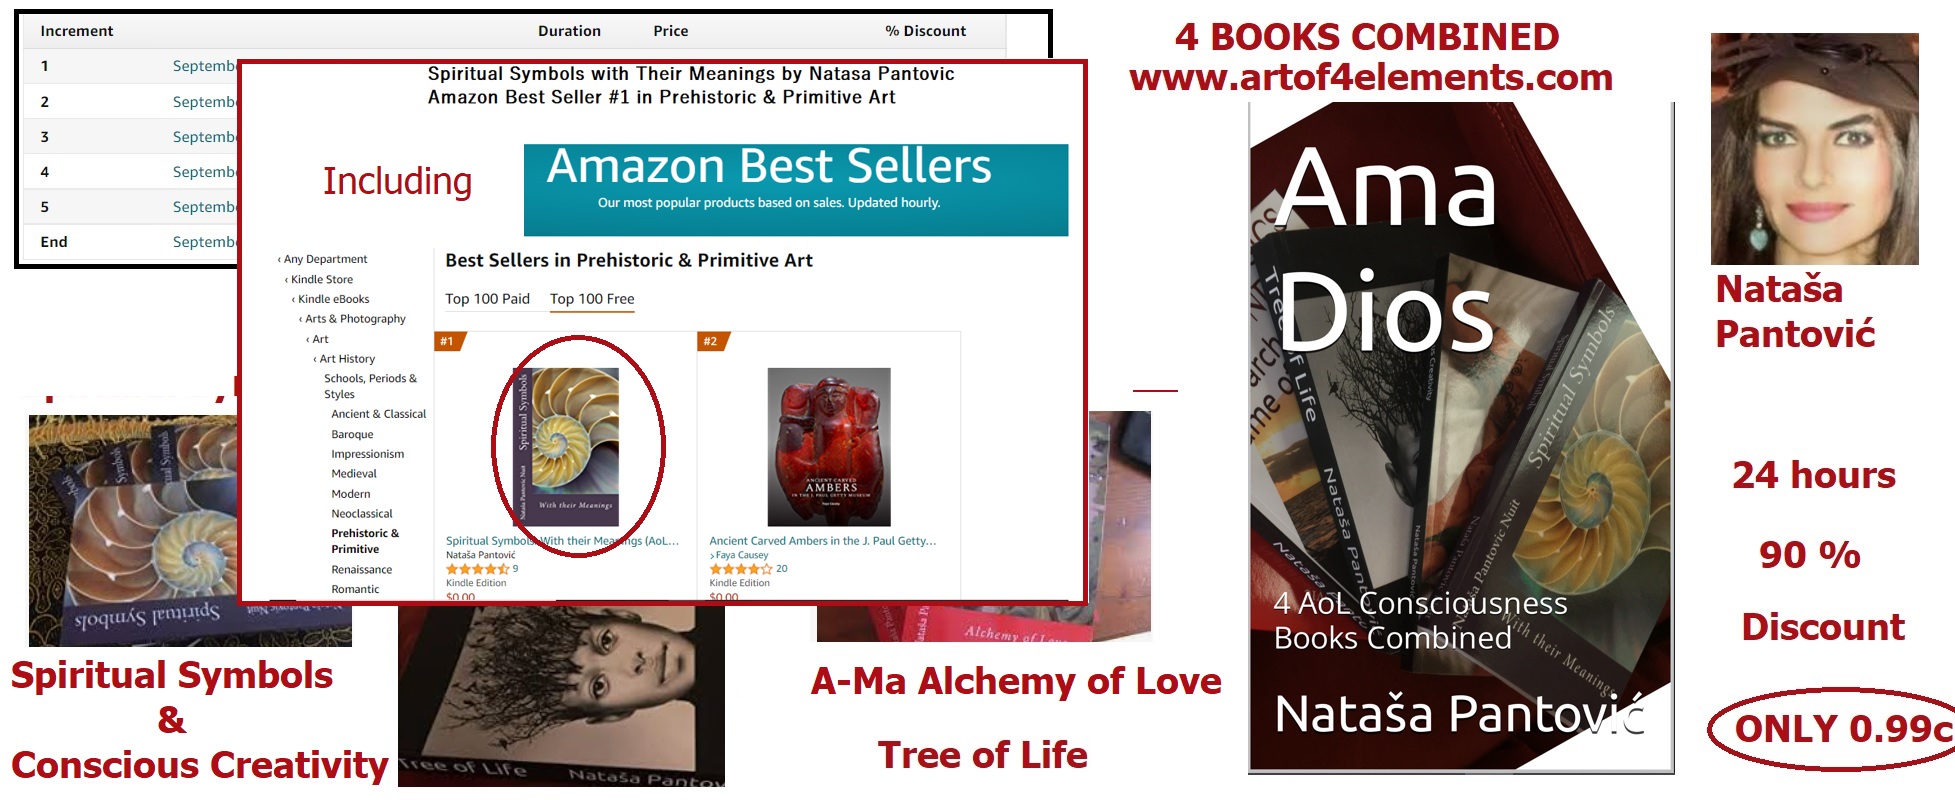 Natasa Pantovic Ama Dios 4 AoL Consciousness Books Combined 90% Discount for Equinox Including Amazon Best Sellers Spiritual Symbols Conscious Creativity